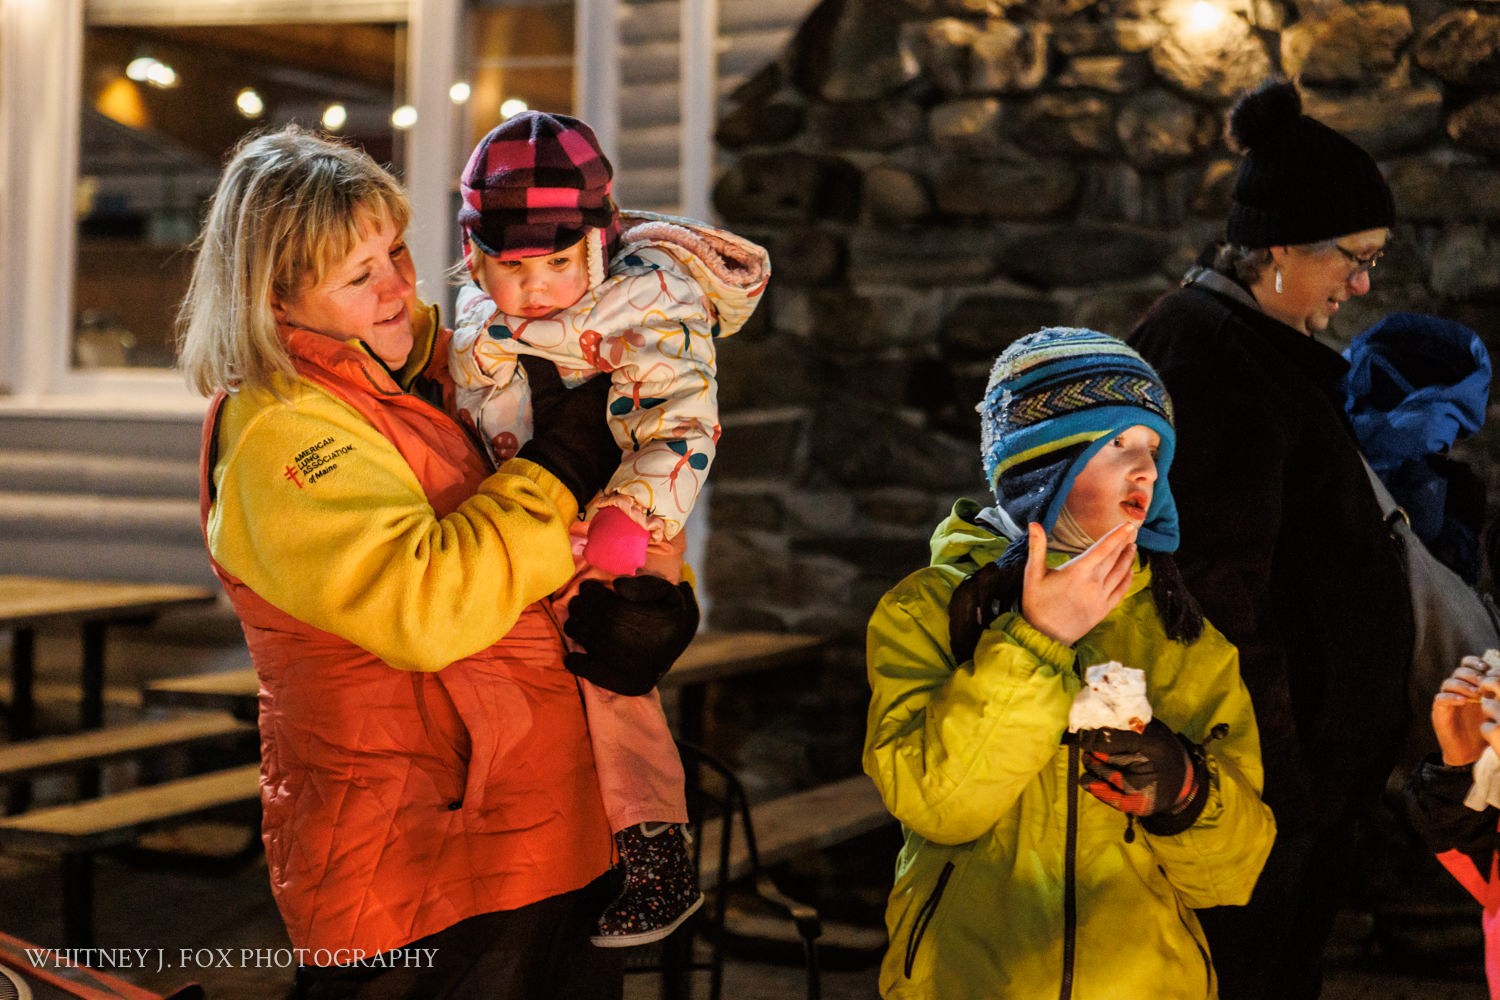 334 winter kids welcome to winter 2022 lost valley auburn maine documentary event photographer whitney j fox 3652 w 1